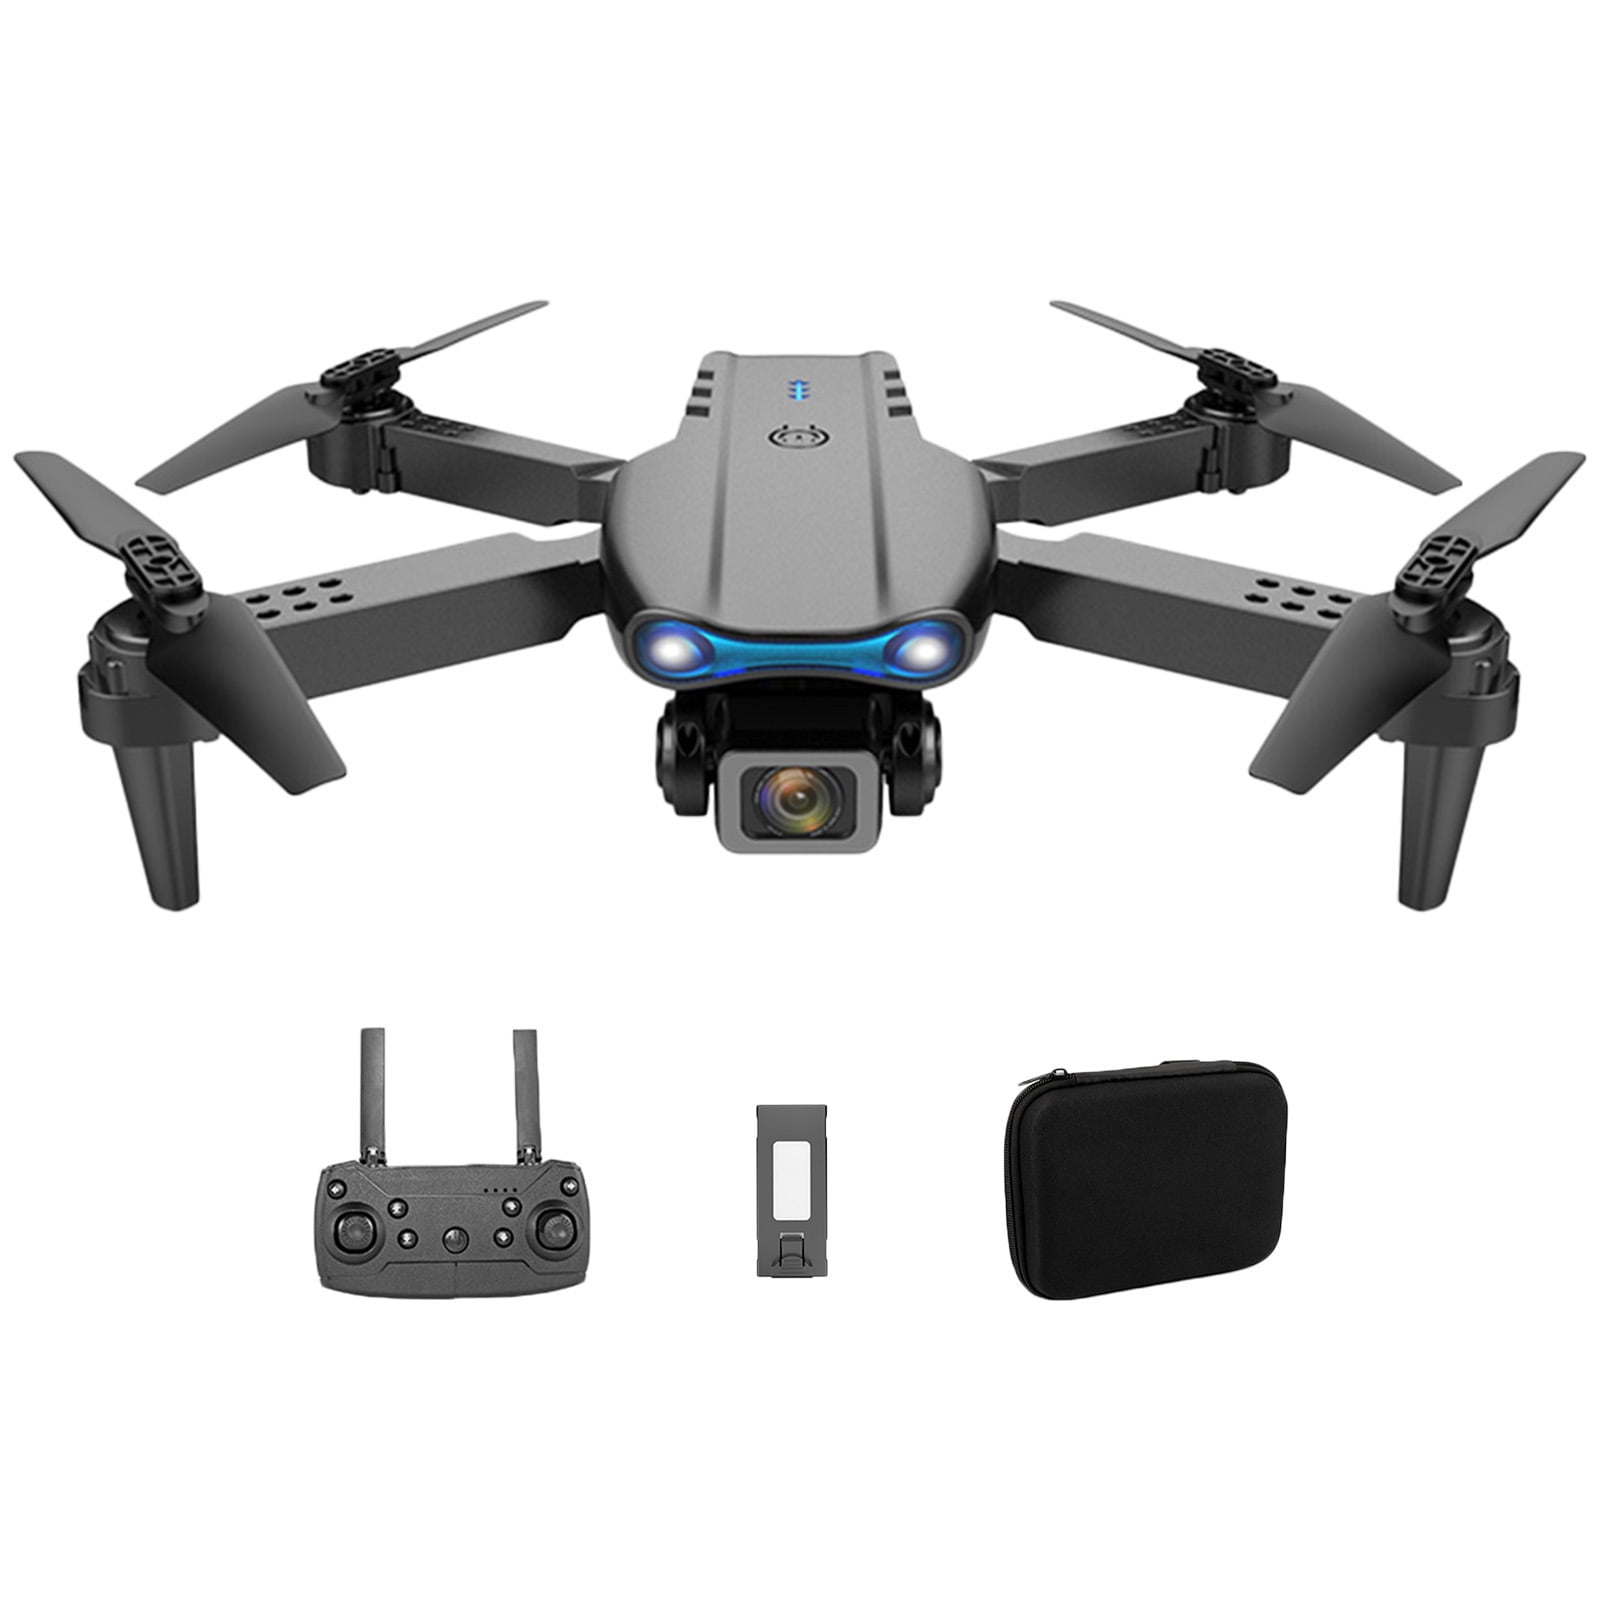 E99 K3 Pro Mini Drone 4K Profesional HD Dual Camera 1080P Obstacle  Avoidance FPV Drones with Single camera 1 battery 